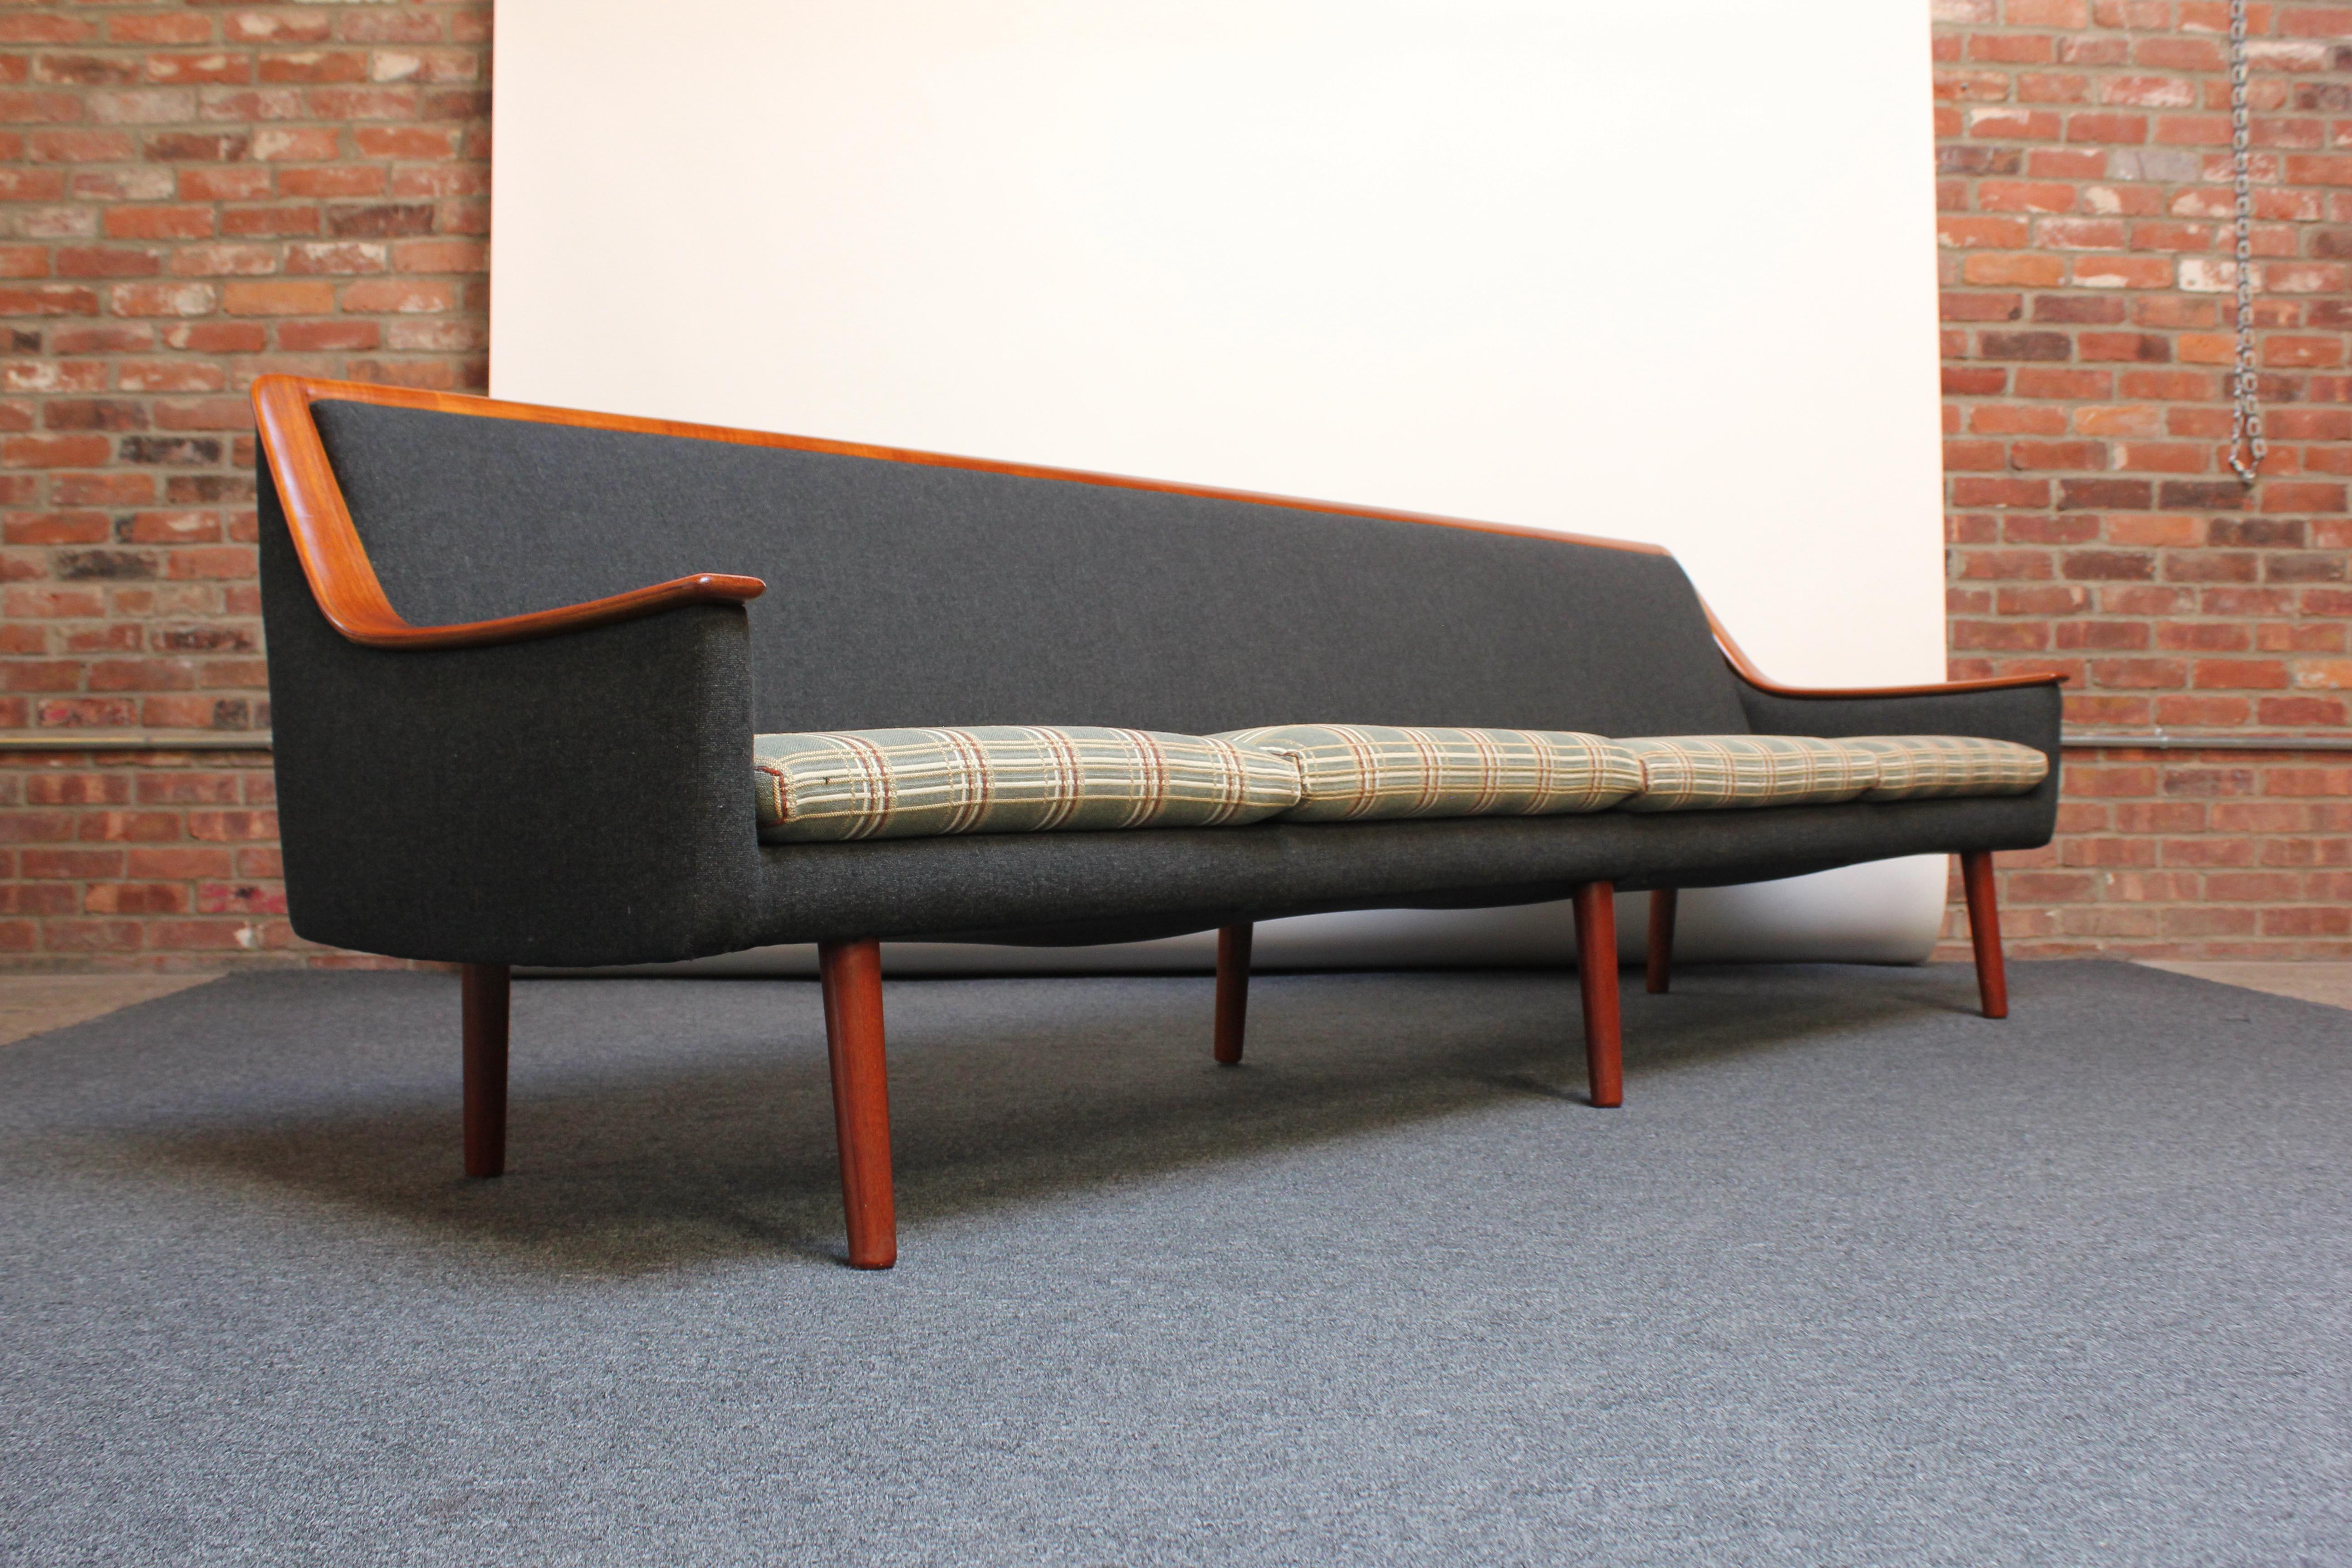 Mid-Century Modern sofa with a continuous, exposed teak arm / back trim (Norway, ca. 1960s). Retains the original upholstery composed of a charcoal wool frame with a contrasting cushion in red, green, white, and oatmeal plaid. The foam and straps